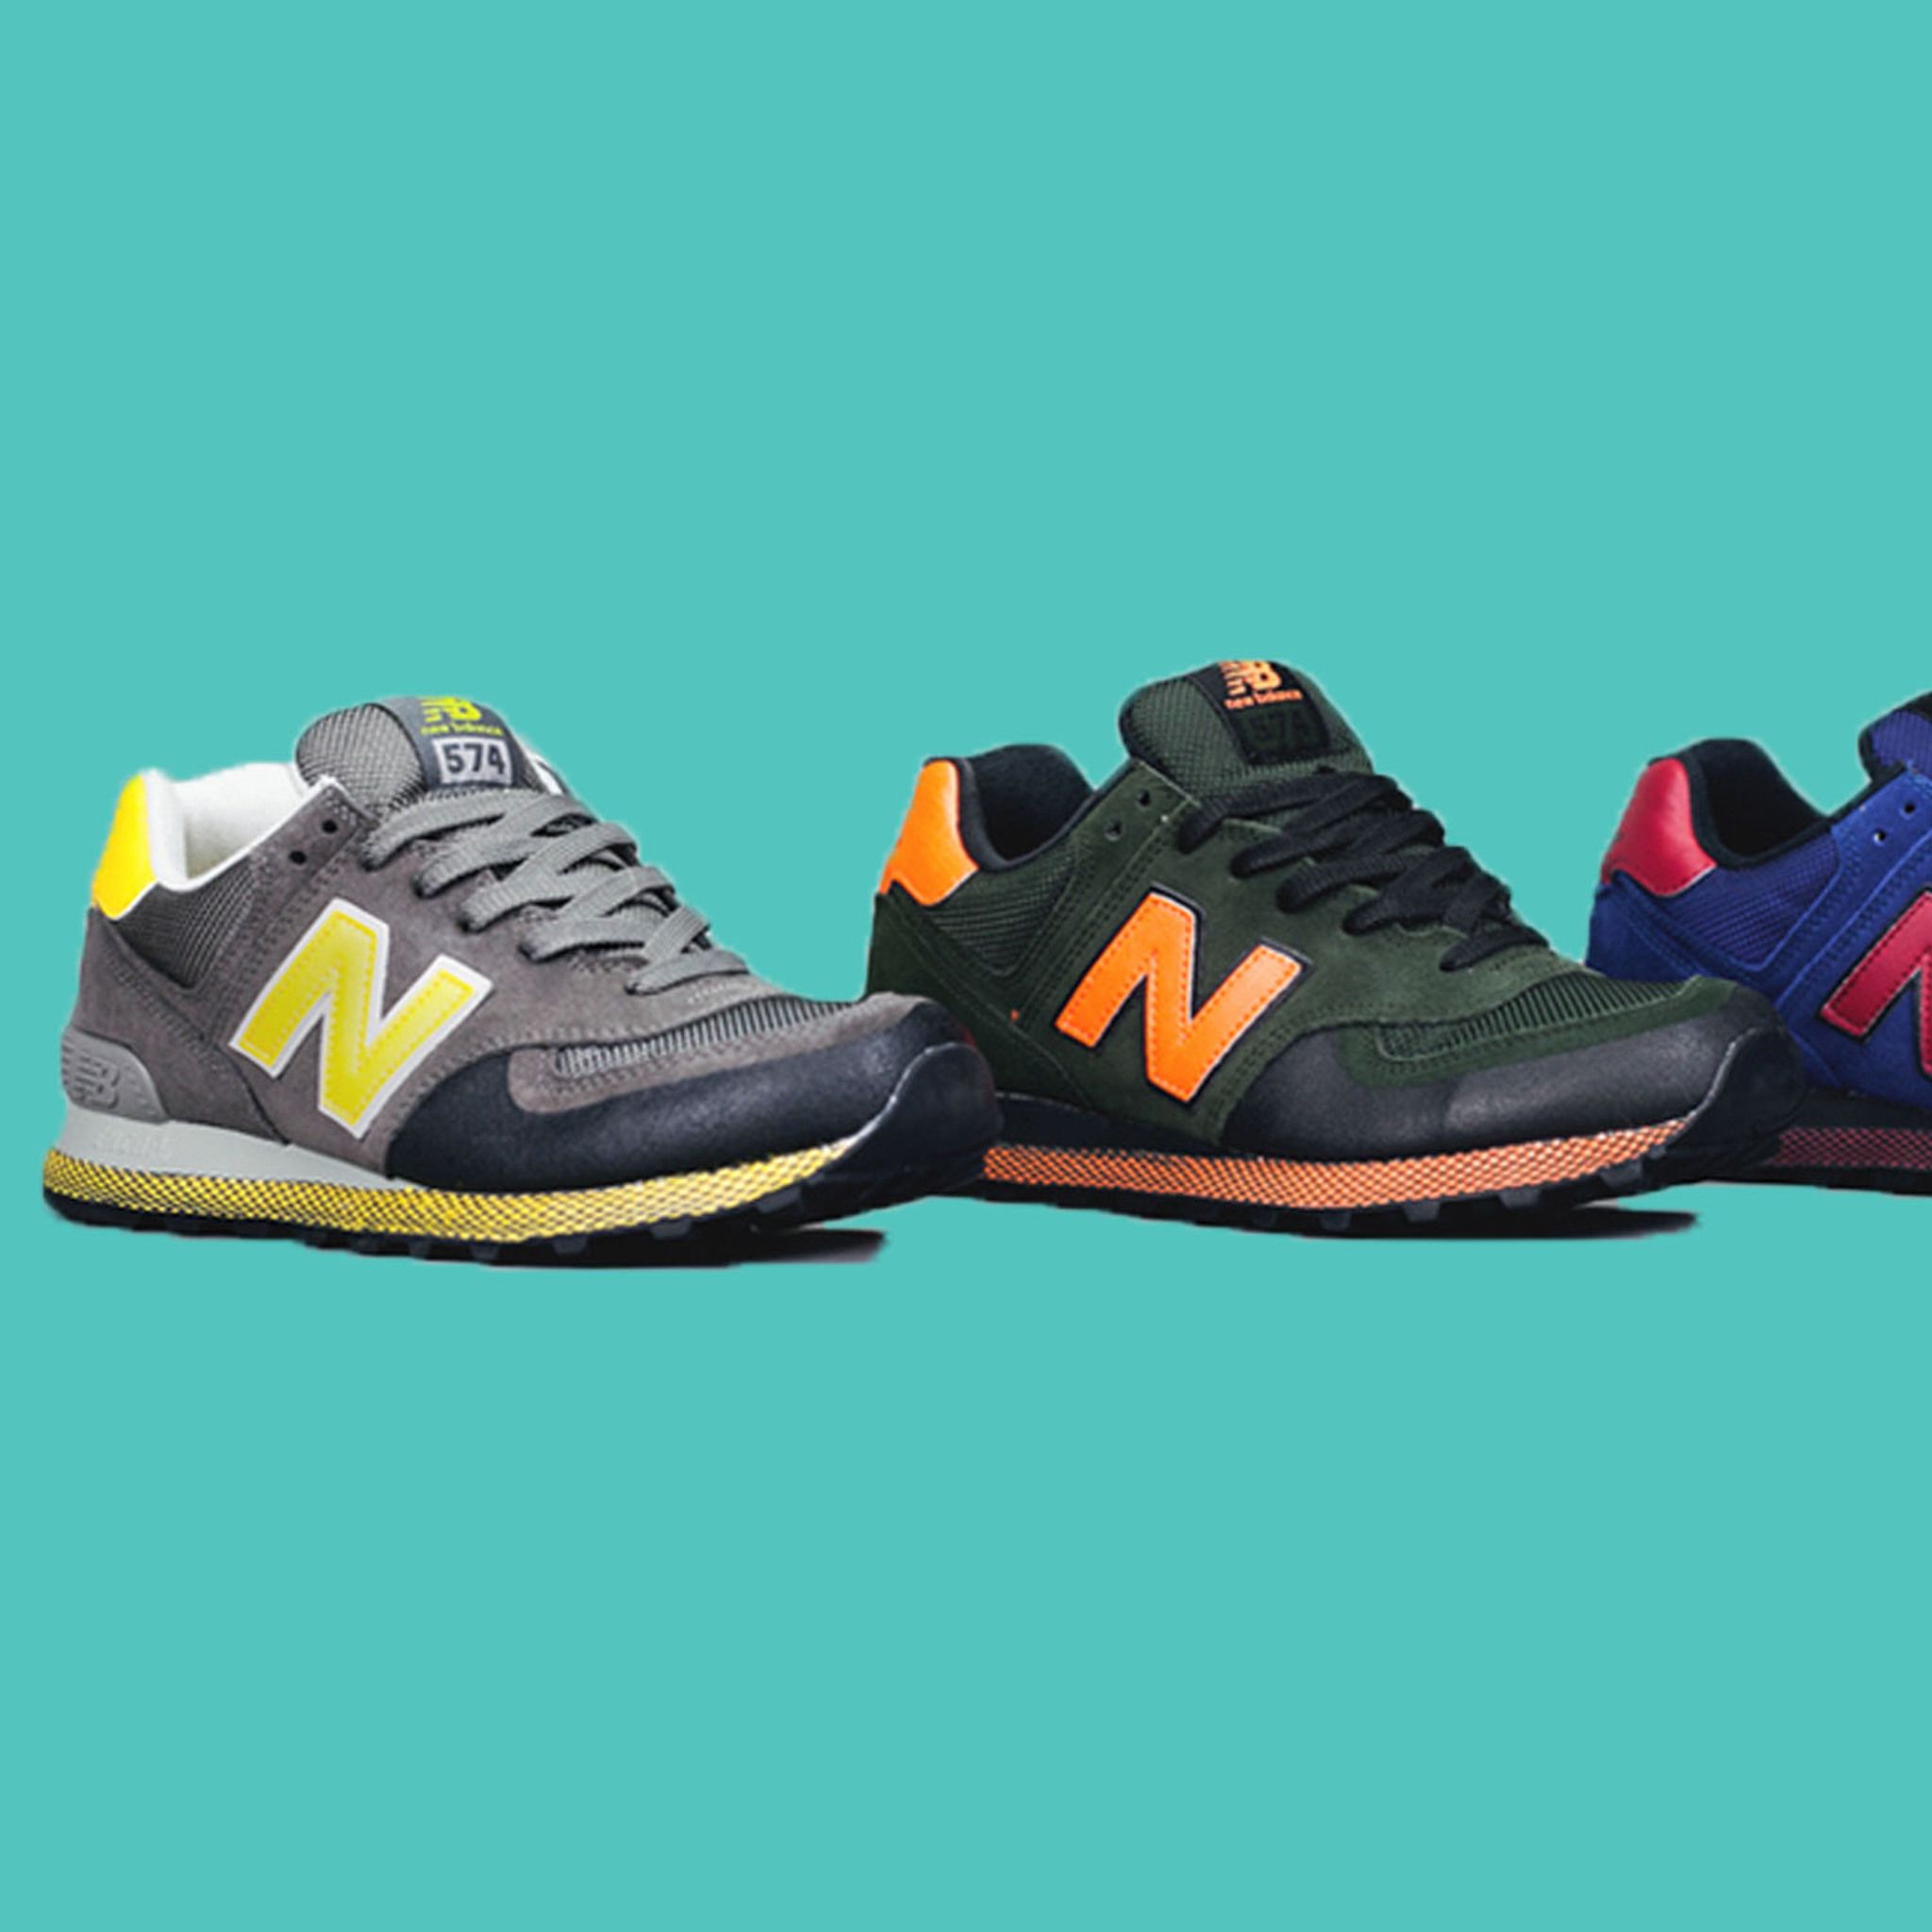 New Balance 574: Trainers Built For Winter